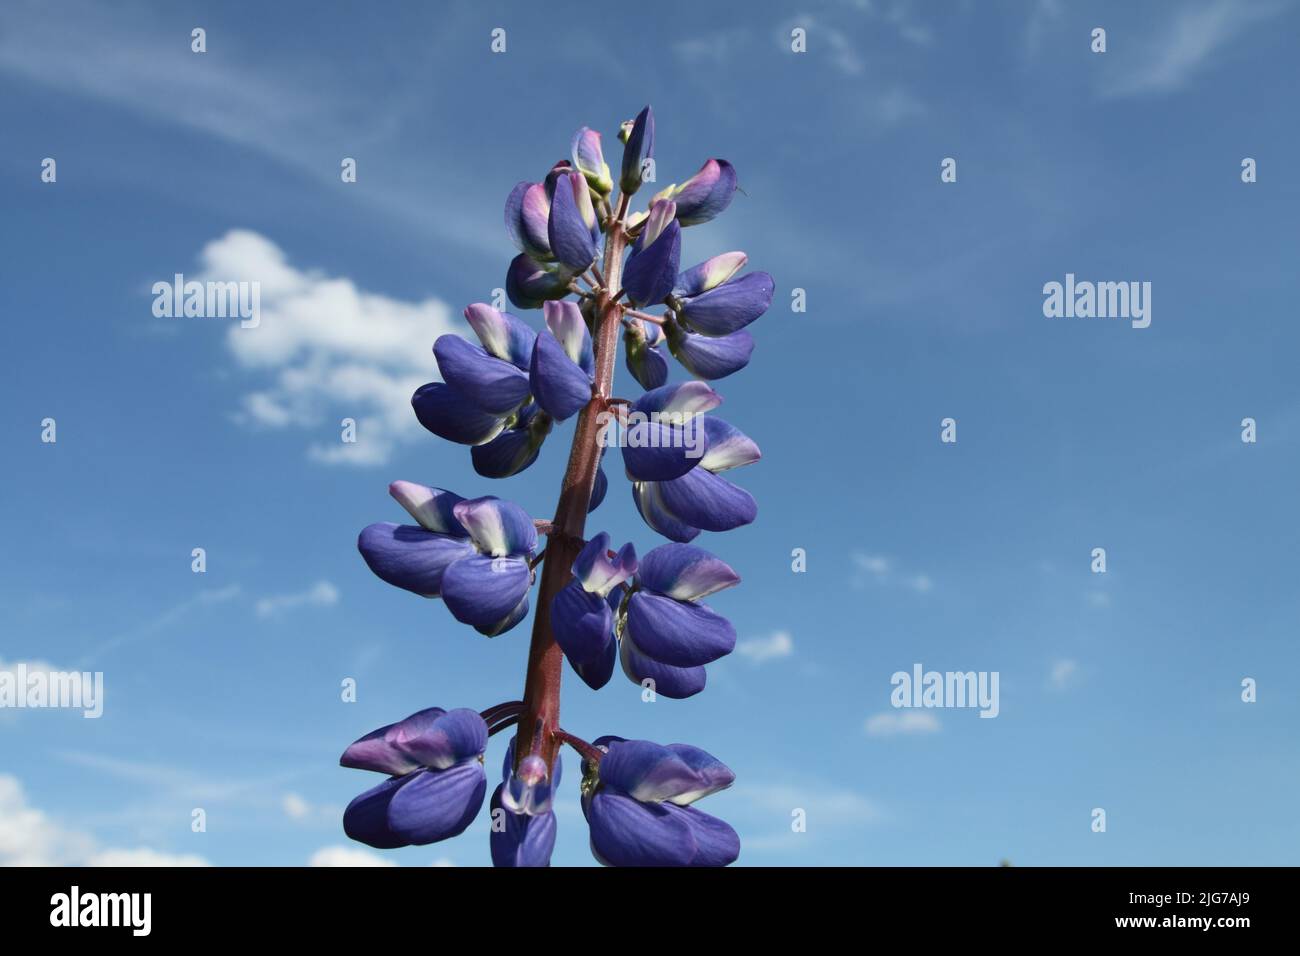 Flowers of multifoliate large-leaved lupin (Lupinus polyphyllus) against the sky in Kirchberg, Hunsrueck, Rhineland-Palatinate, Germany Stock Photo